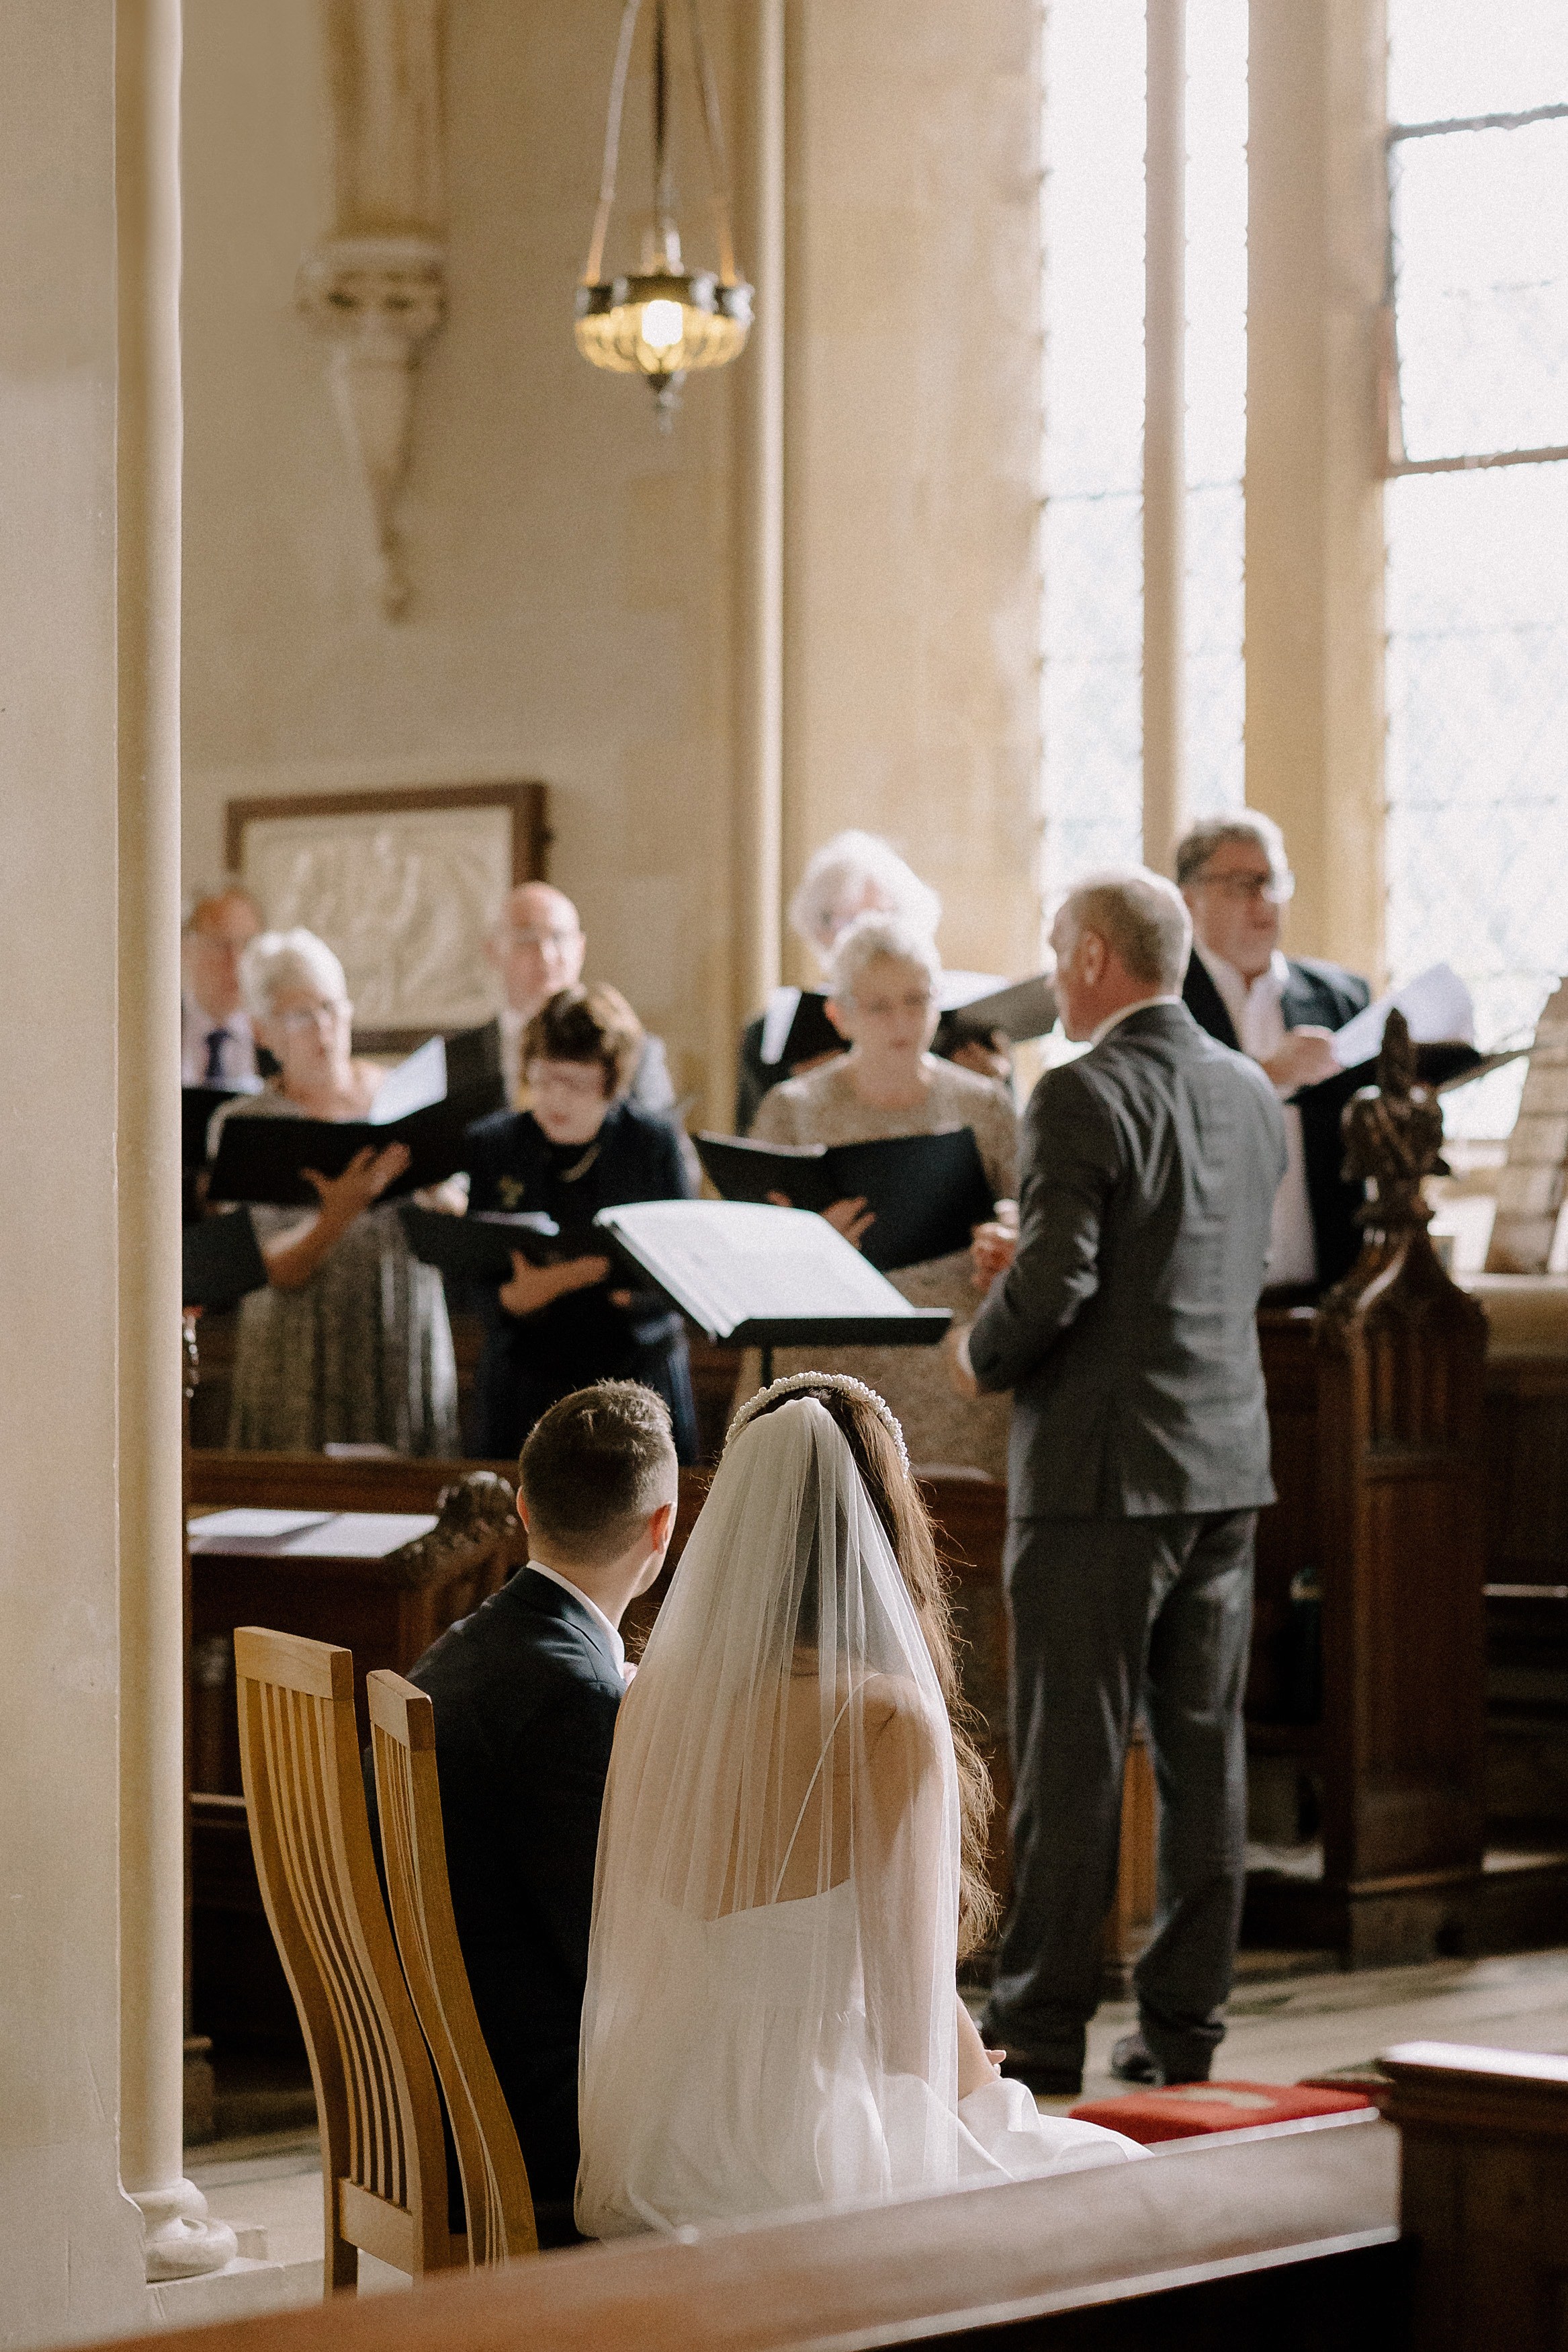 Bride and groom in foreground looking away from the camera at the choir singing